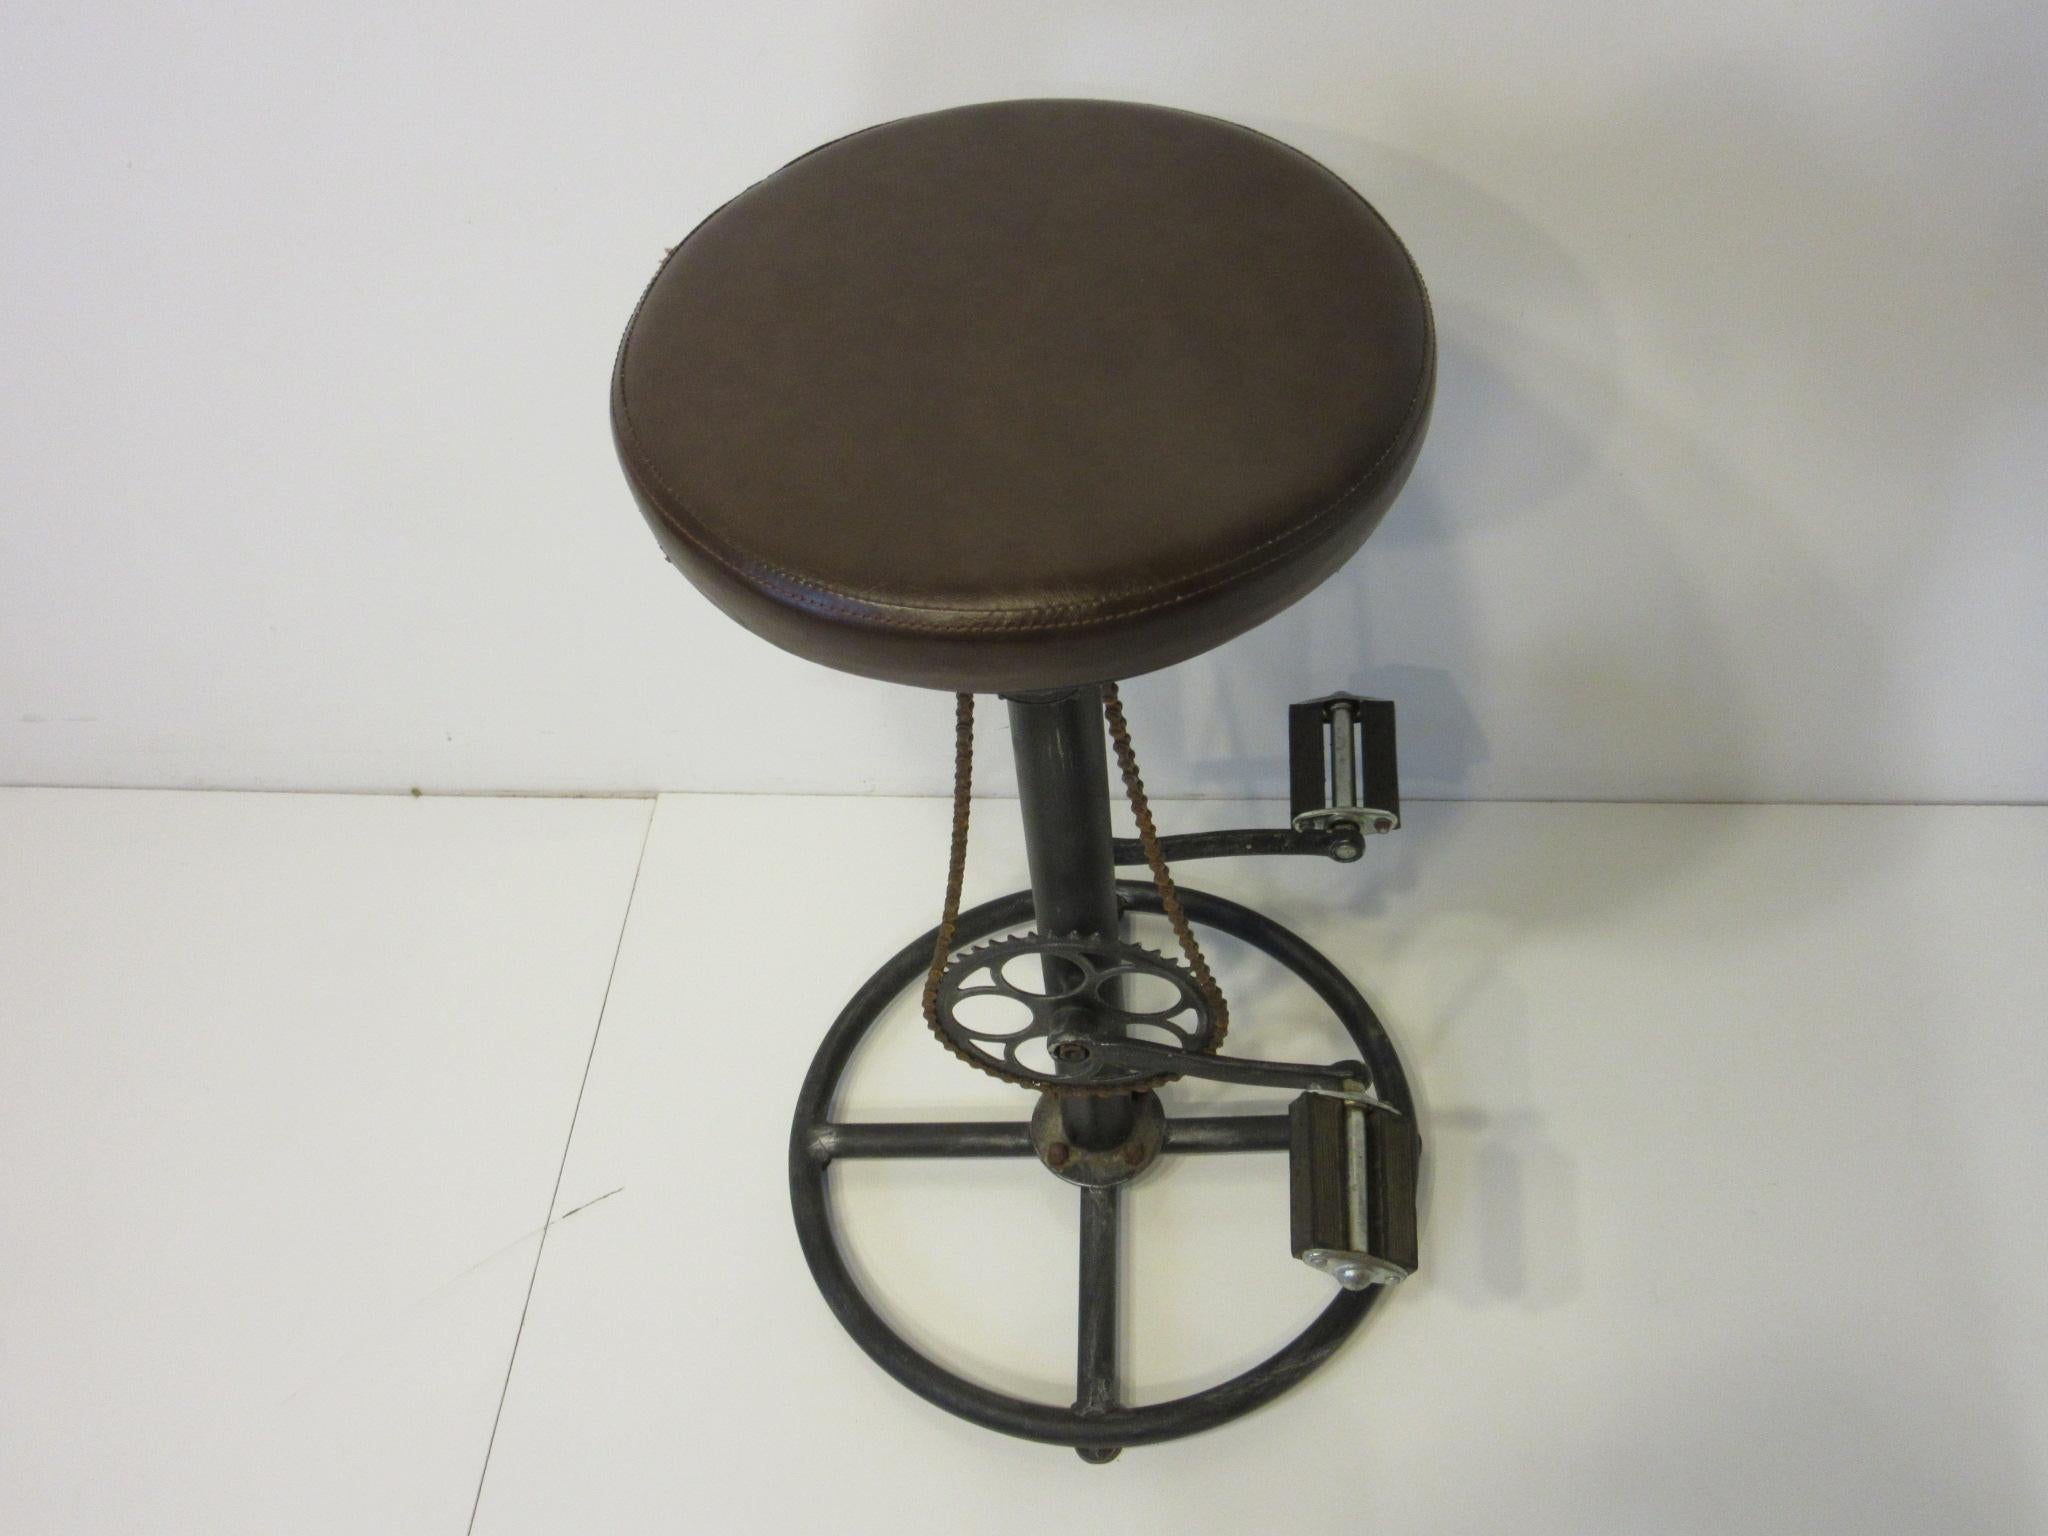 A fun Folk Art industrial stool with painted metal base and shaft having swiveling leatherette seat and a bicycle sprocket, chain and fixed pedals as foot rests. A nice unique piece for that corner of the kitchen, office or bar area.